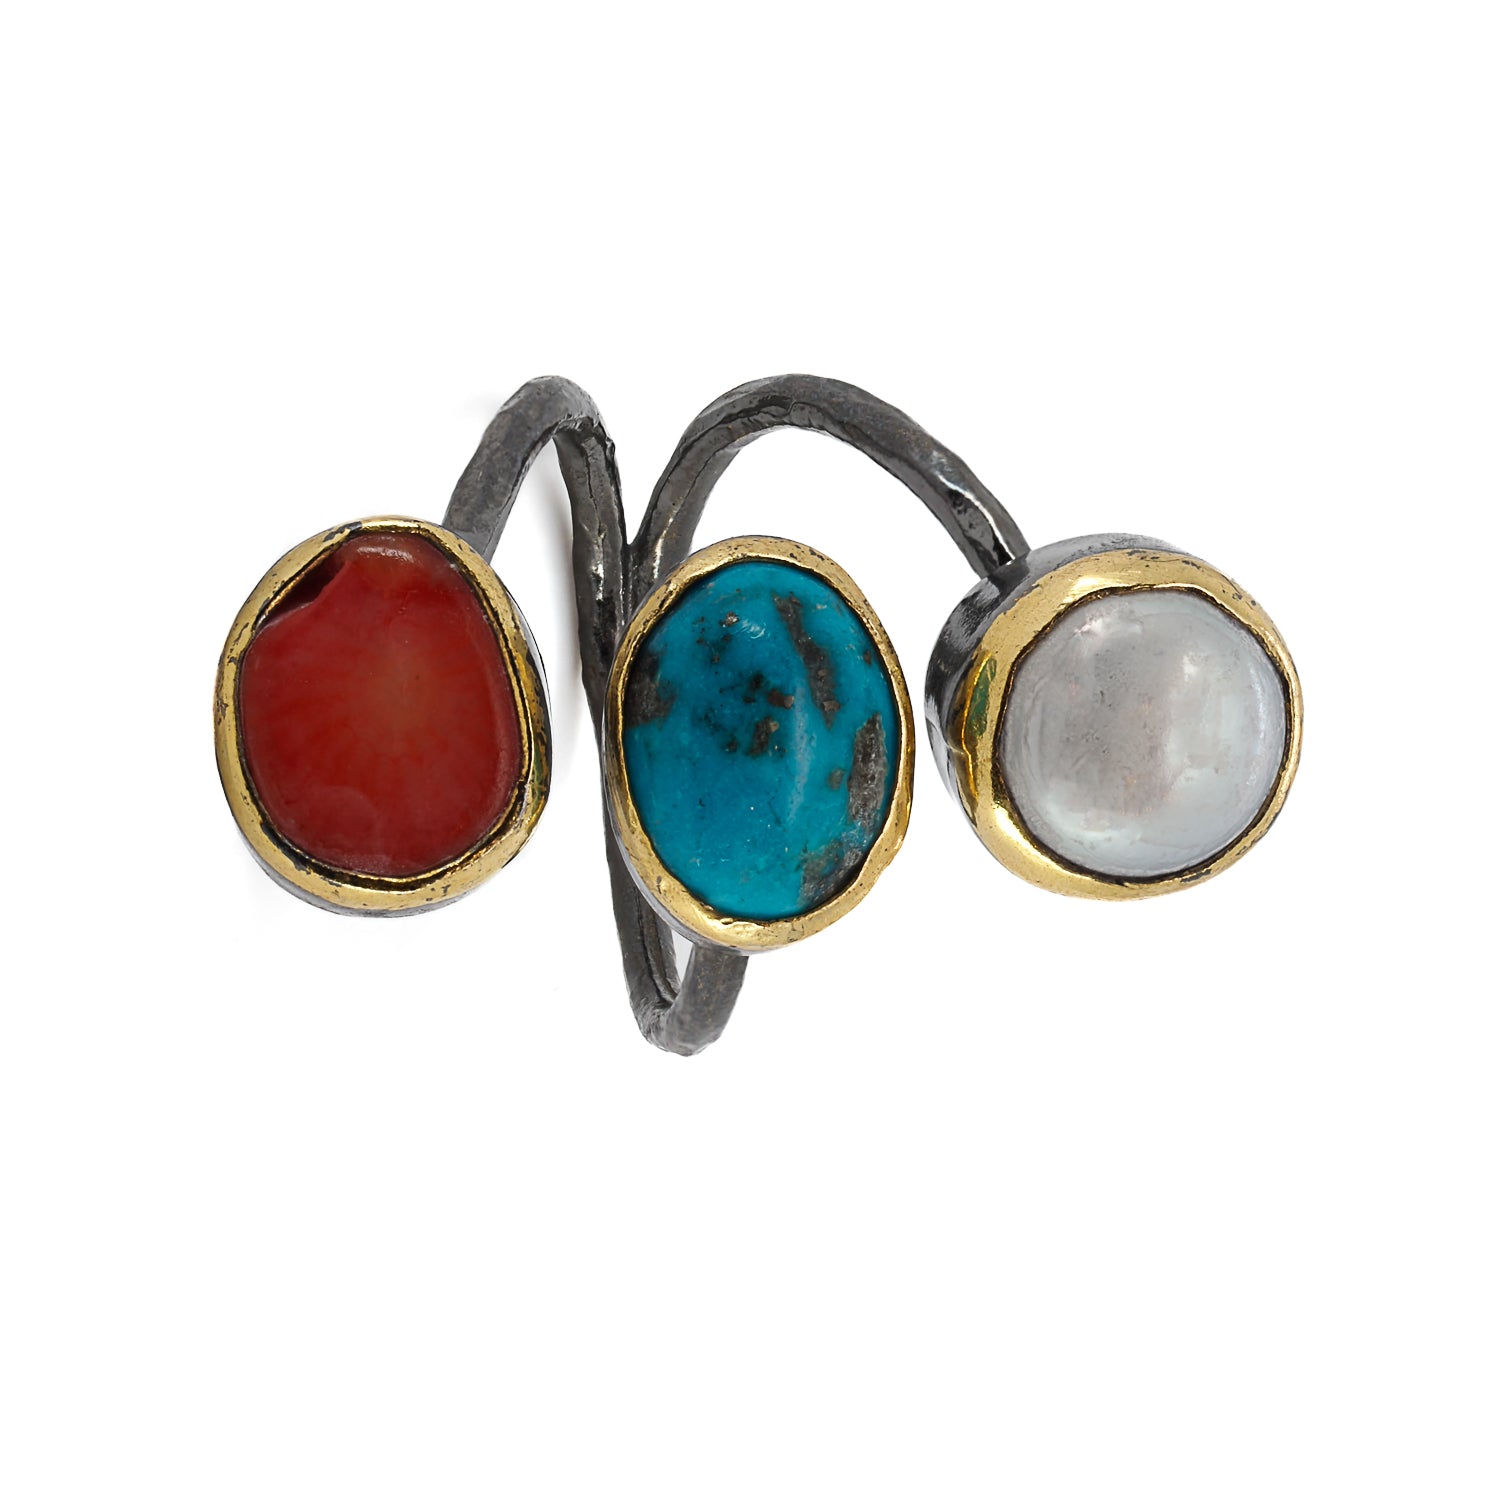 The harmonious blend of gemstones in the Triple Gemstone Sterling Silver Ring.